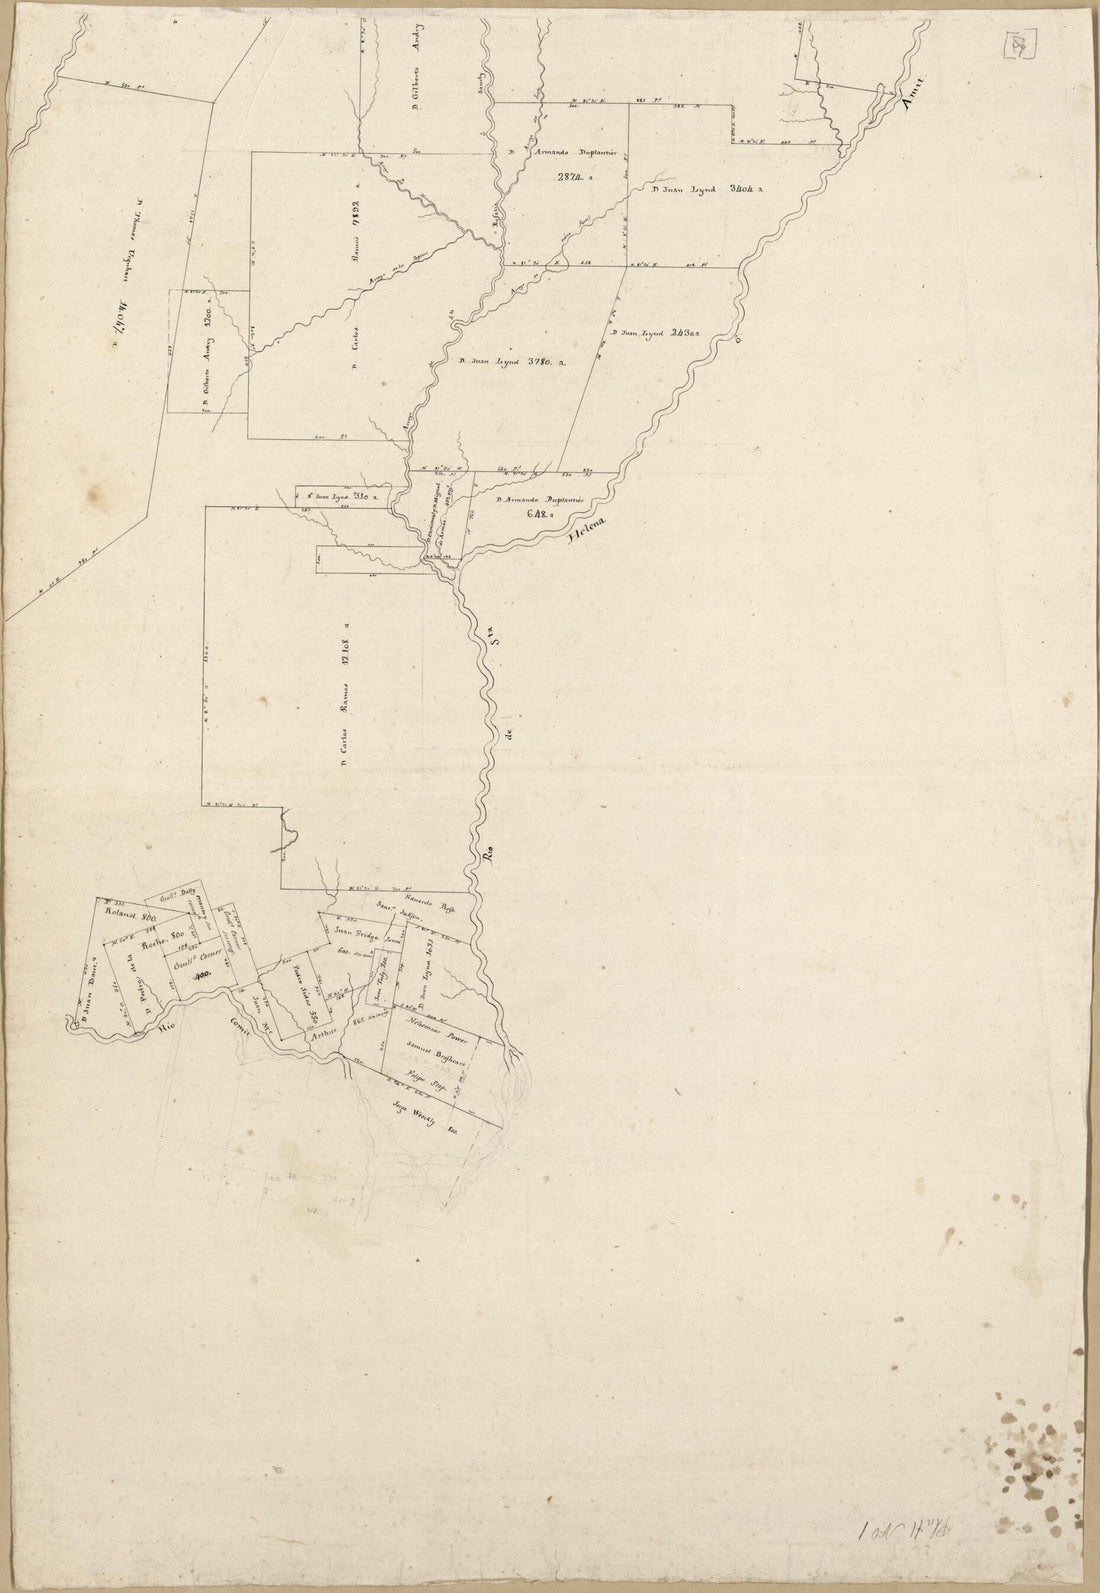 This old map of Map of Spanish West Florida Bounded by Rios Comite and Amite from 1805 was created by Vicente Sebastián Pintado in 1805